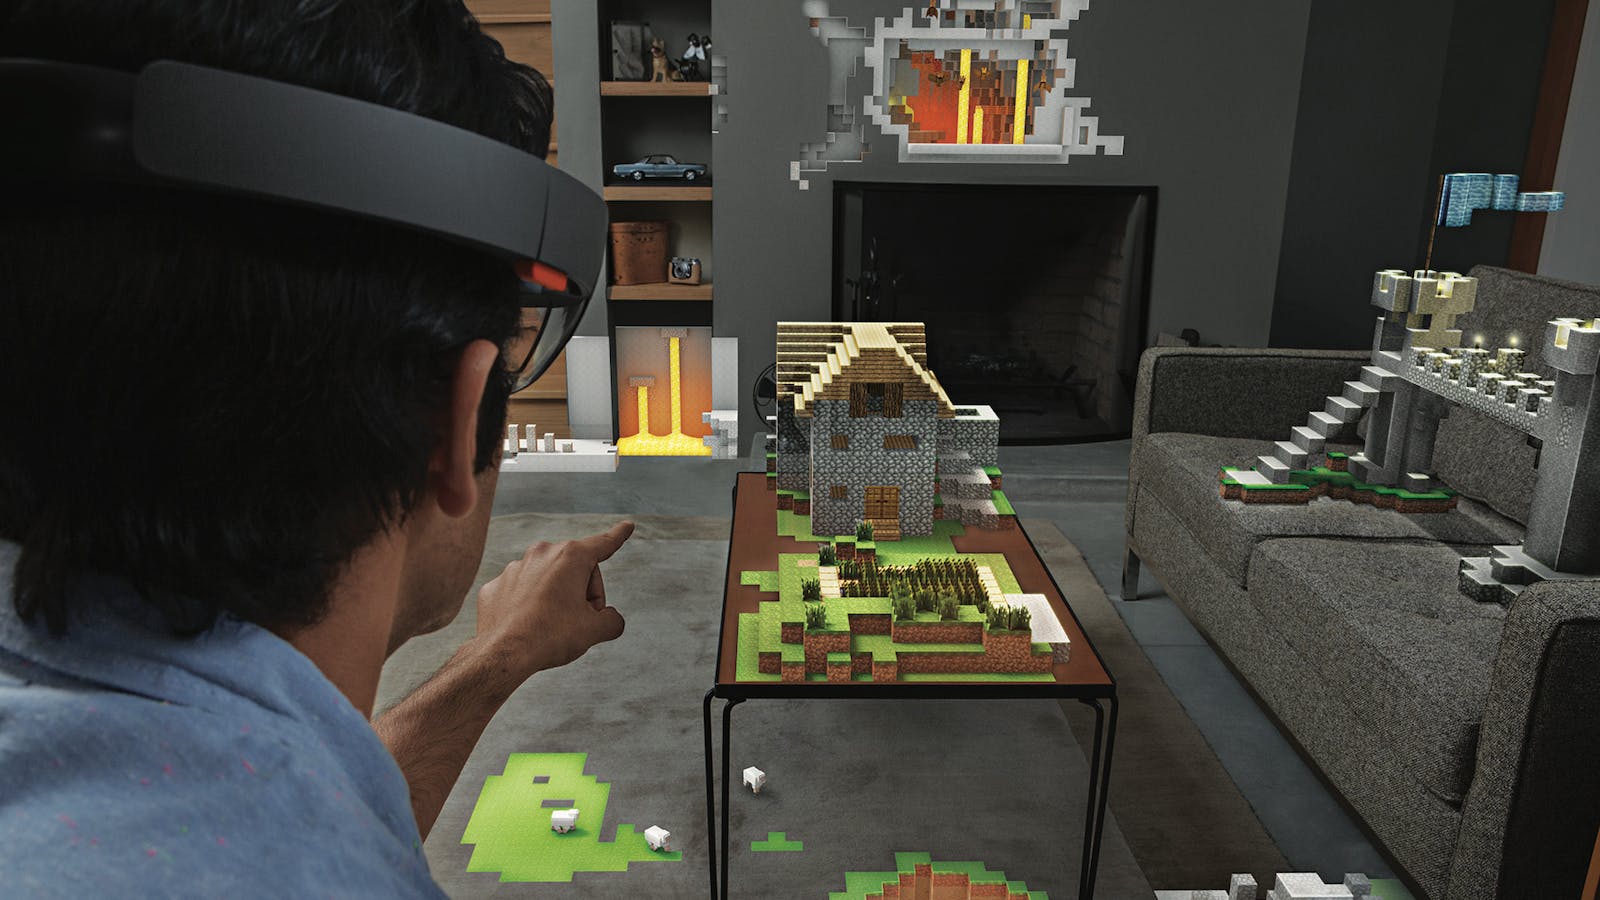 A concept image of Minecraft running on HoloLens, from the product line's early days. Credit: Microsoft